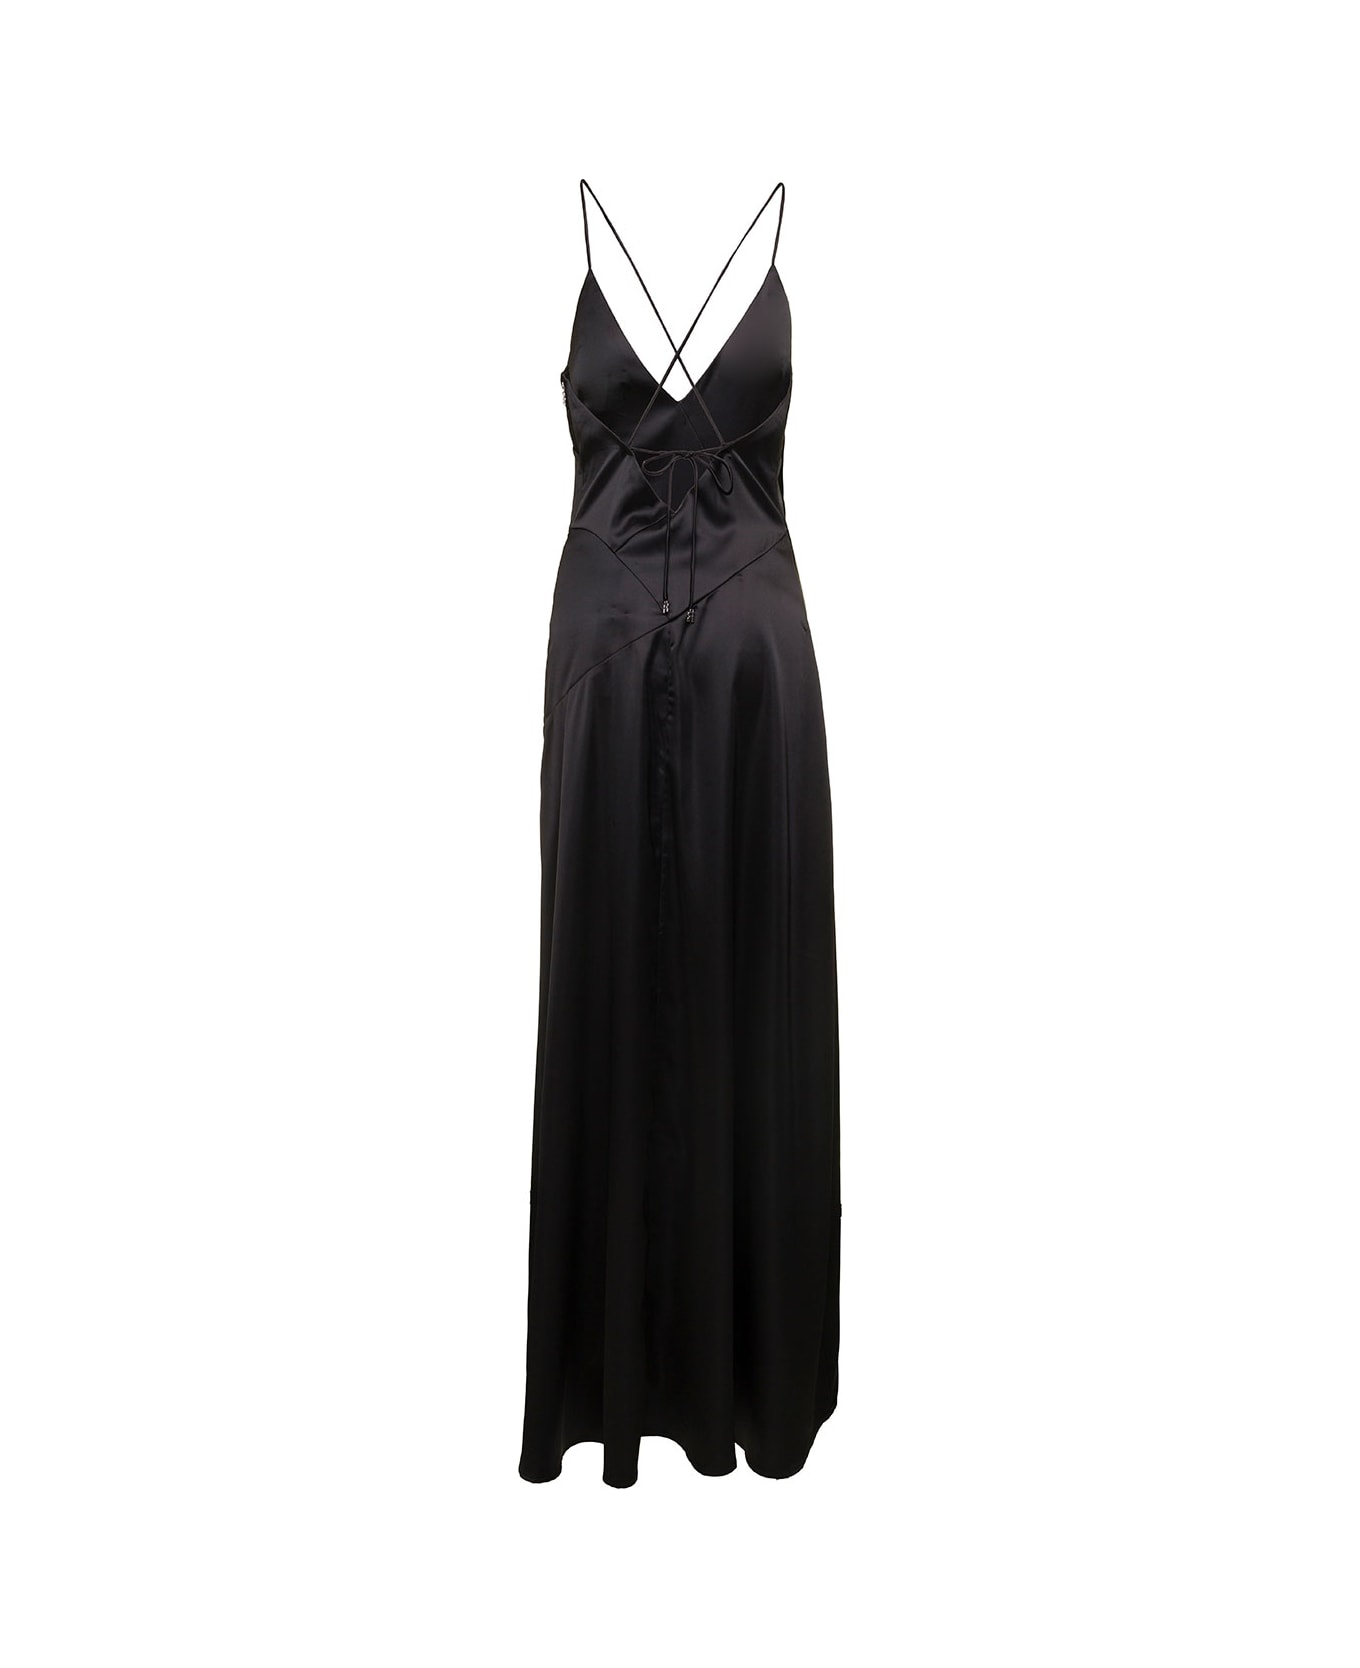 Rotate by Birger Christensen Long Black Dress With Criss Cross Straps On The Back In Polyester Blend Woman Rotate - Black